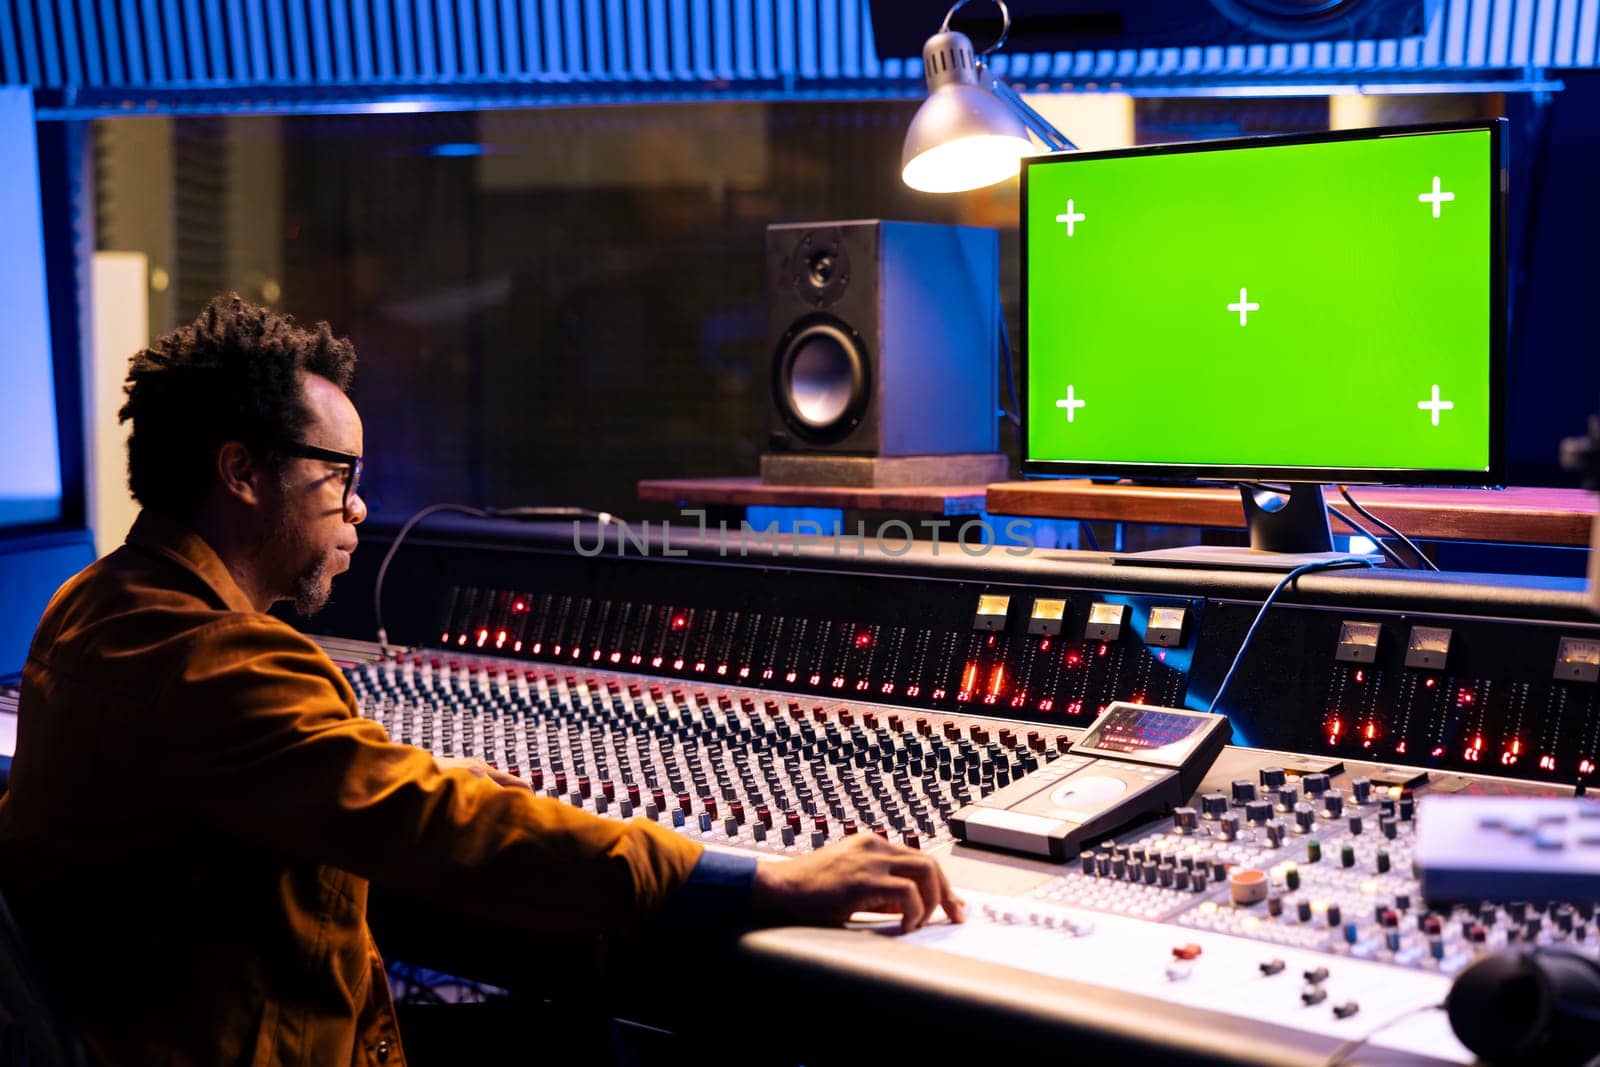 Sound designer operating mixing console and greenscreen monitor, twisting various knobs and buttons in professional studio. Audio technician editing tracks in post production, technical gear.